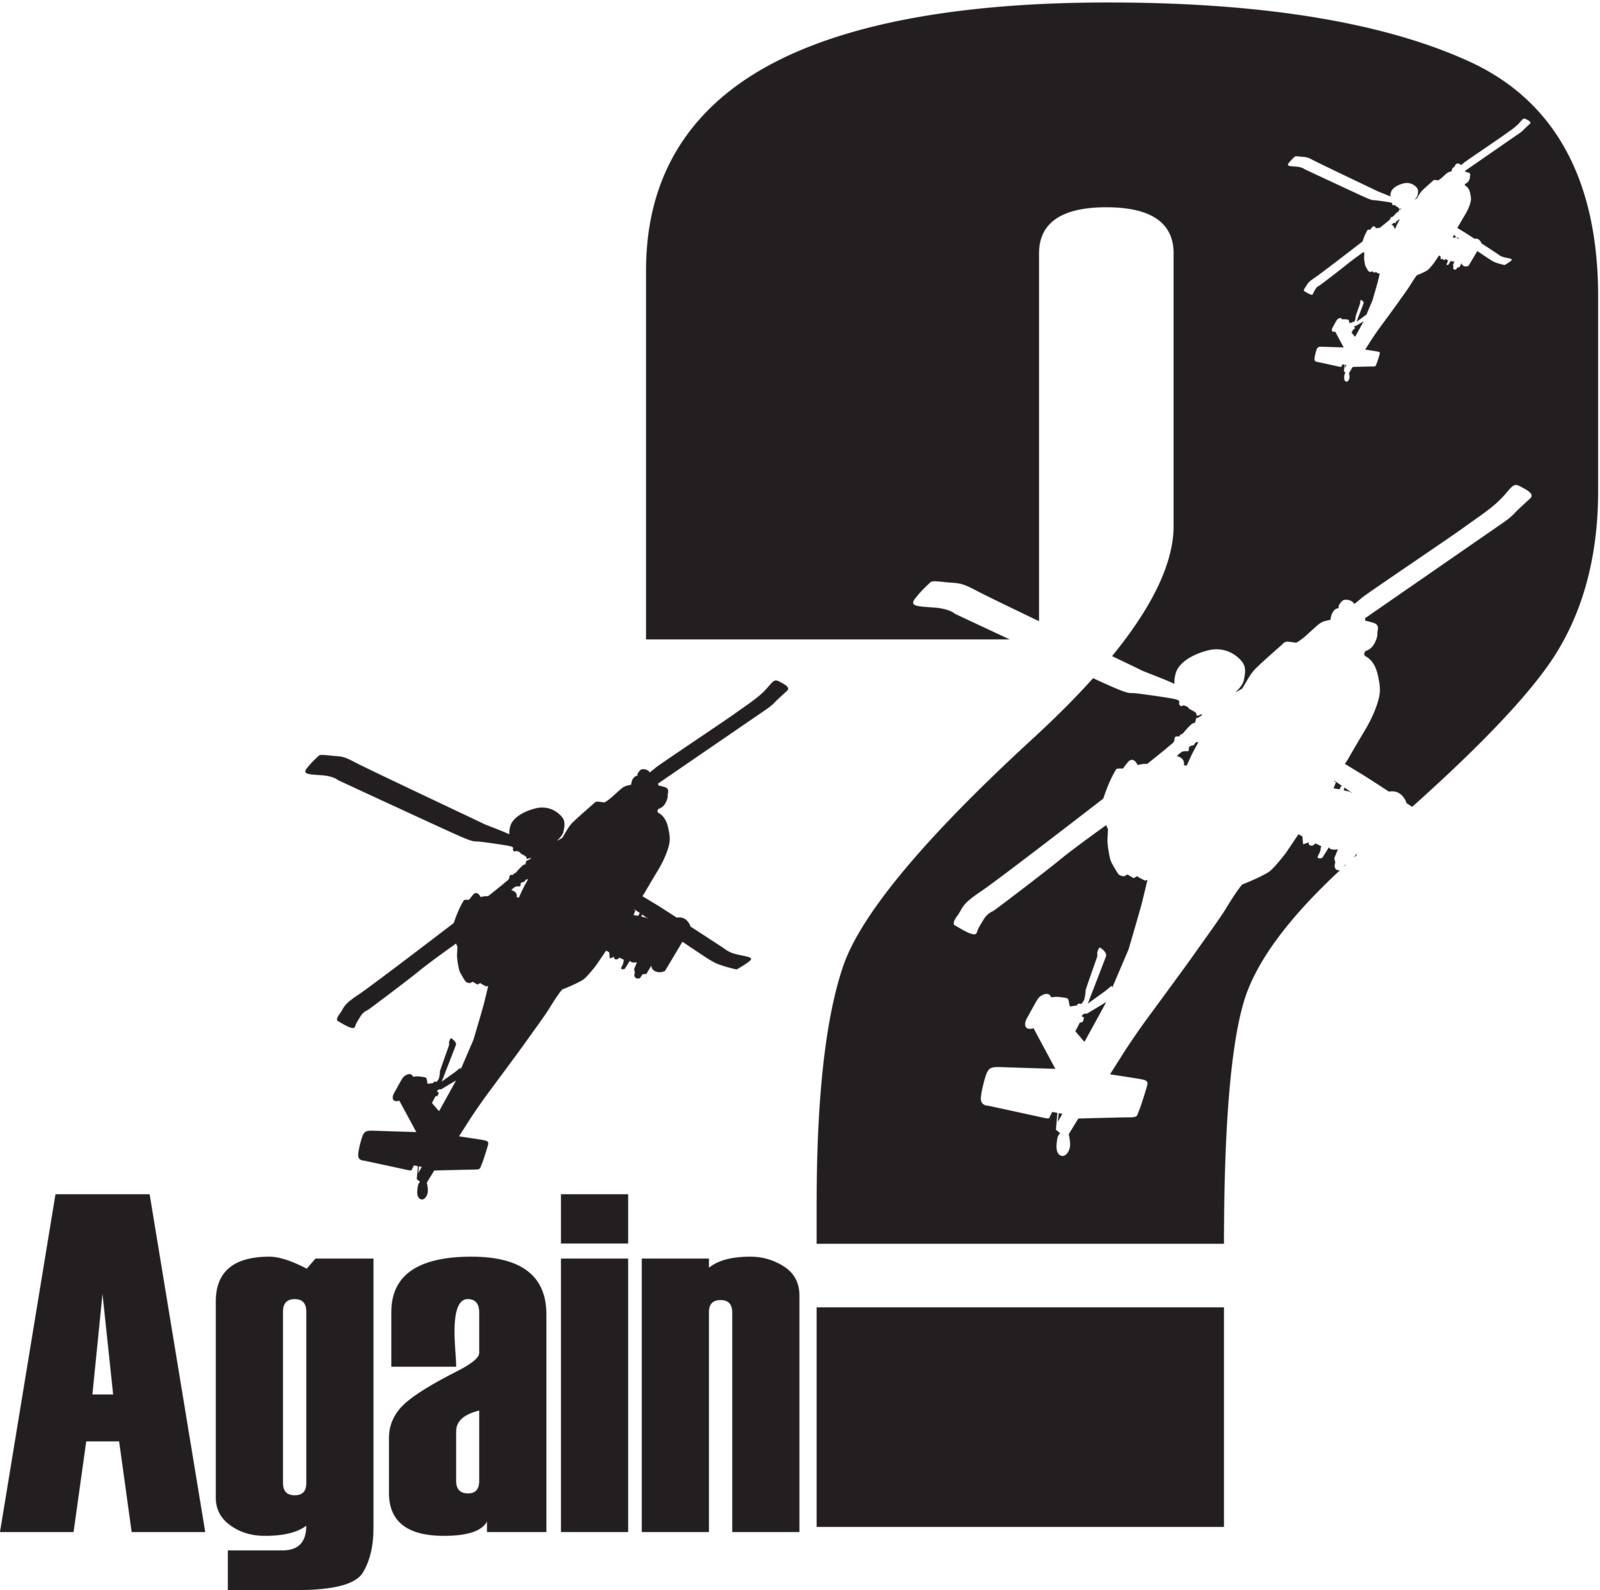 Anti war poster with question mark and flying helicopter silhouettes